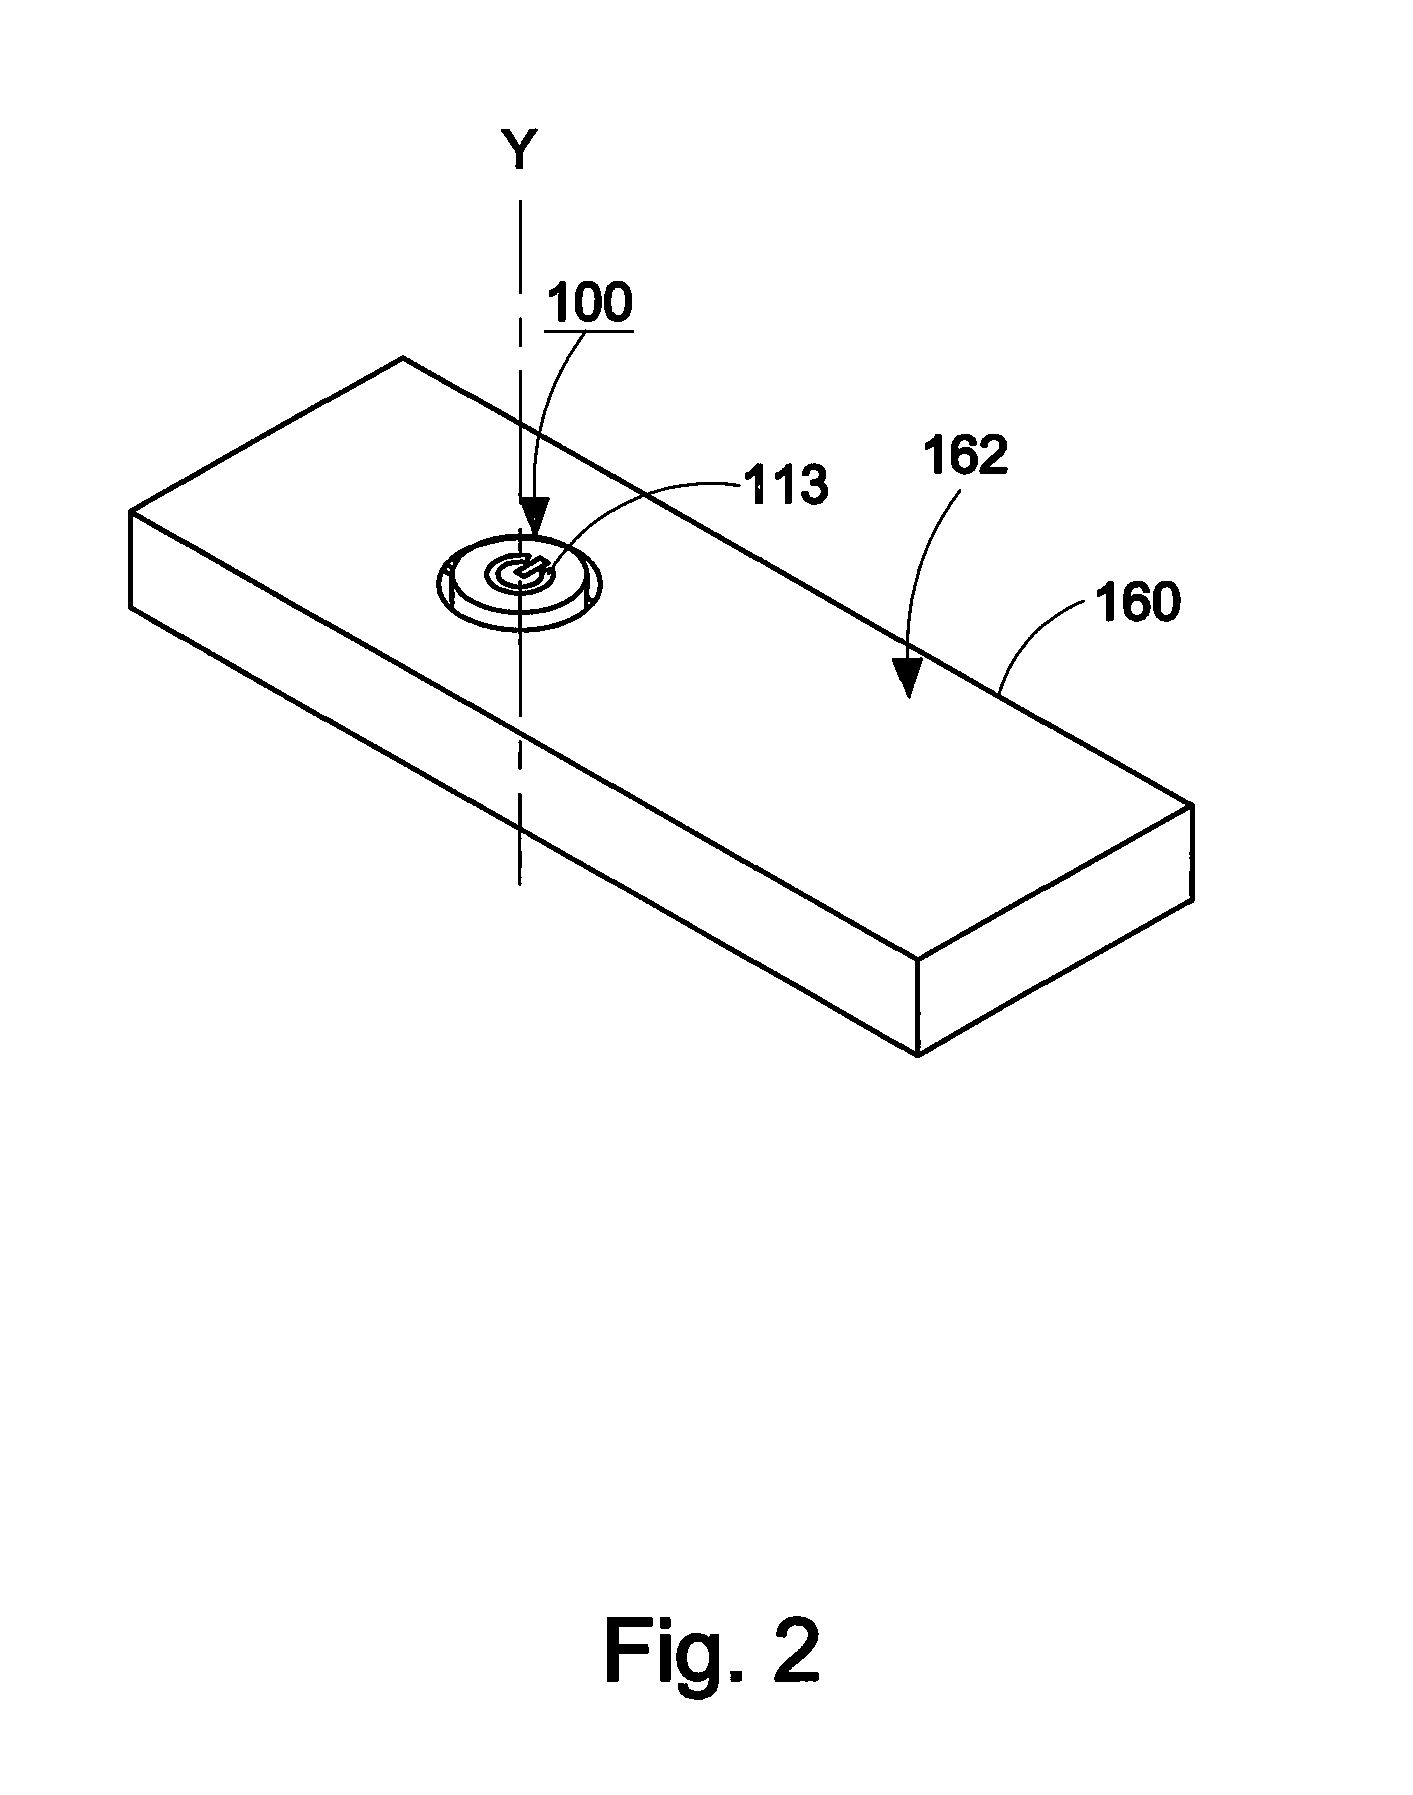 Illumination button, illumination switch assembly, and button structure having quickly removable button cap